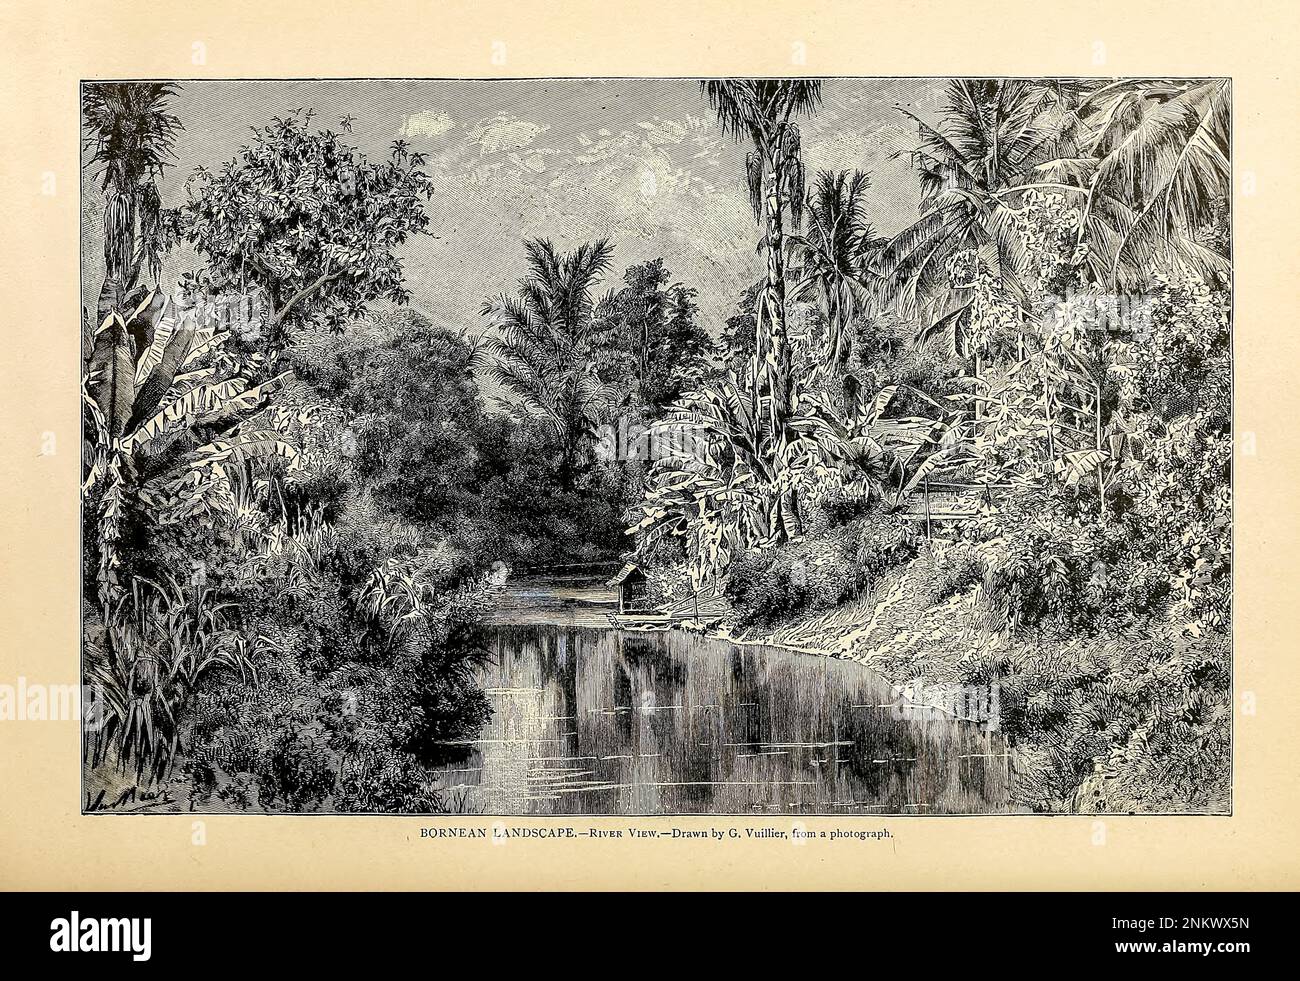 Bornean landscape River view Drawn by Gaston Vuillier Chapter XXI - The Malays from Cyclopedia universal history : embracing the most complete and recent presentation of the subject in two principal parts or divisions of more than six thousand pages by John Clark Ridpath, 1840-1900 Publication date 1895 Publisher Boston : Balch Bros. Volume 6 History of Man and Mankind Stock Photo